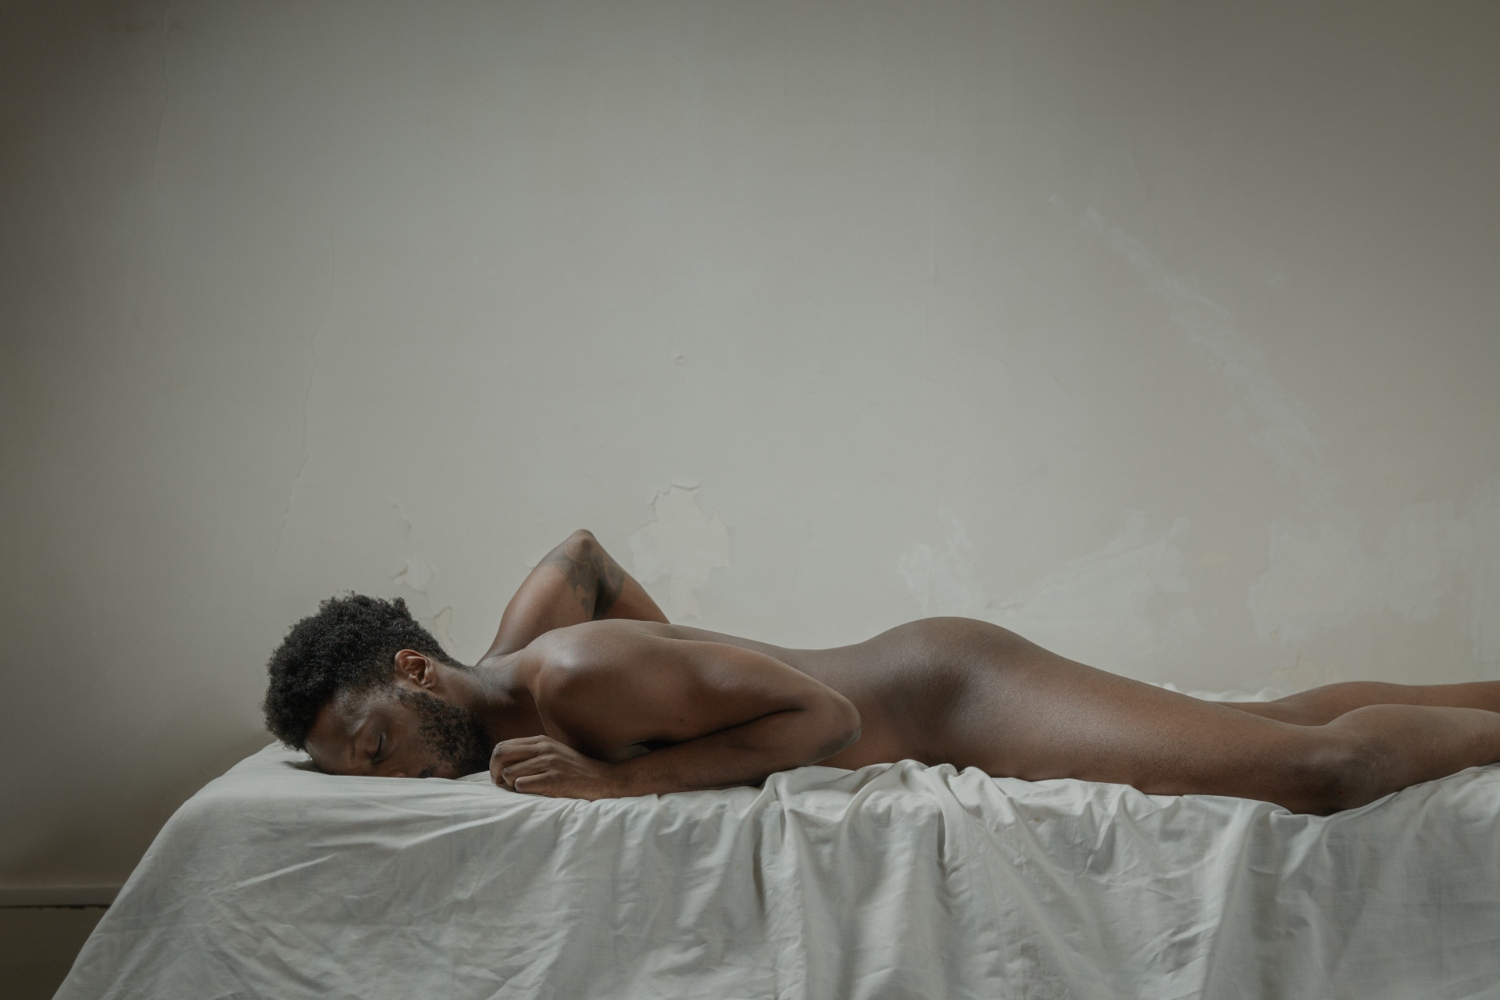 A man lies face down on a white bed, posing for Laura Stevens' series of male nudes, "Him"